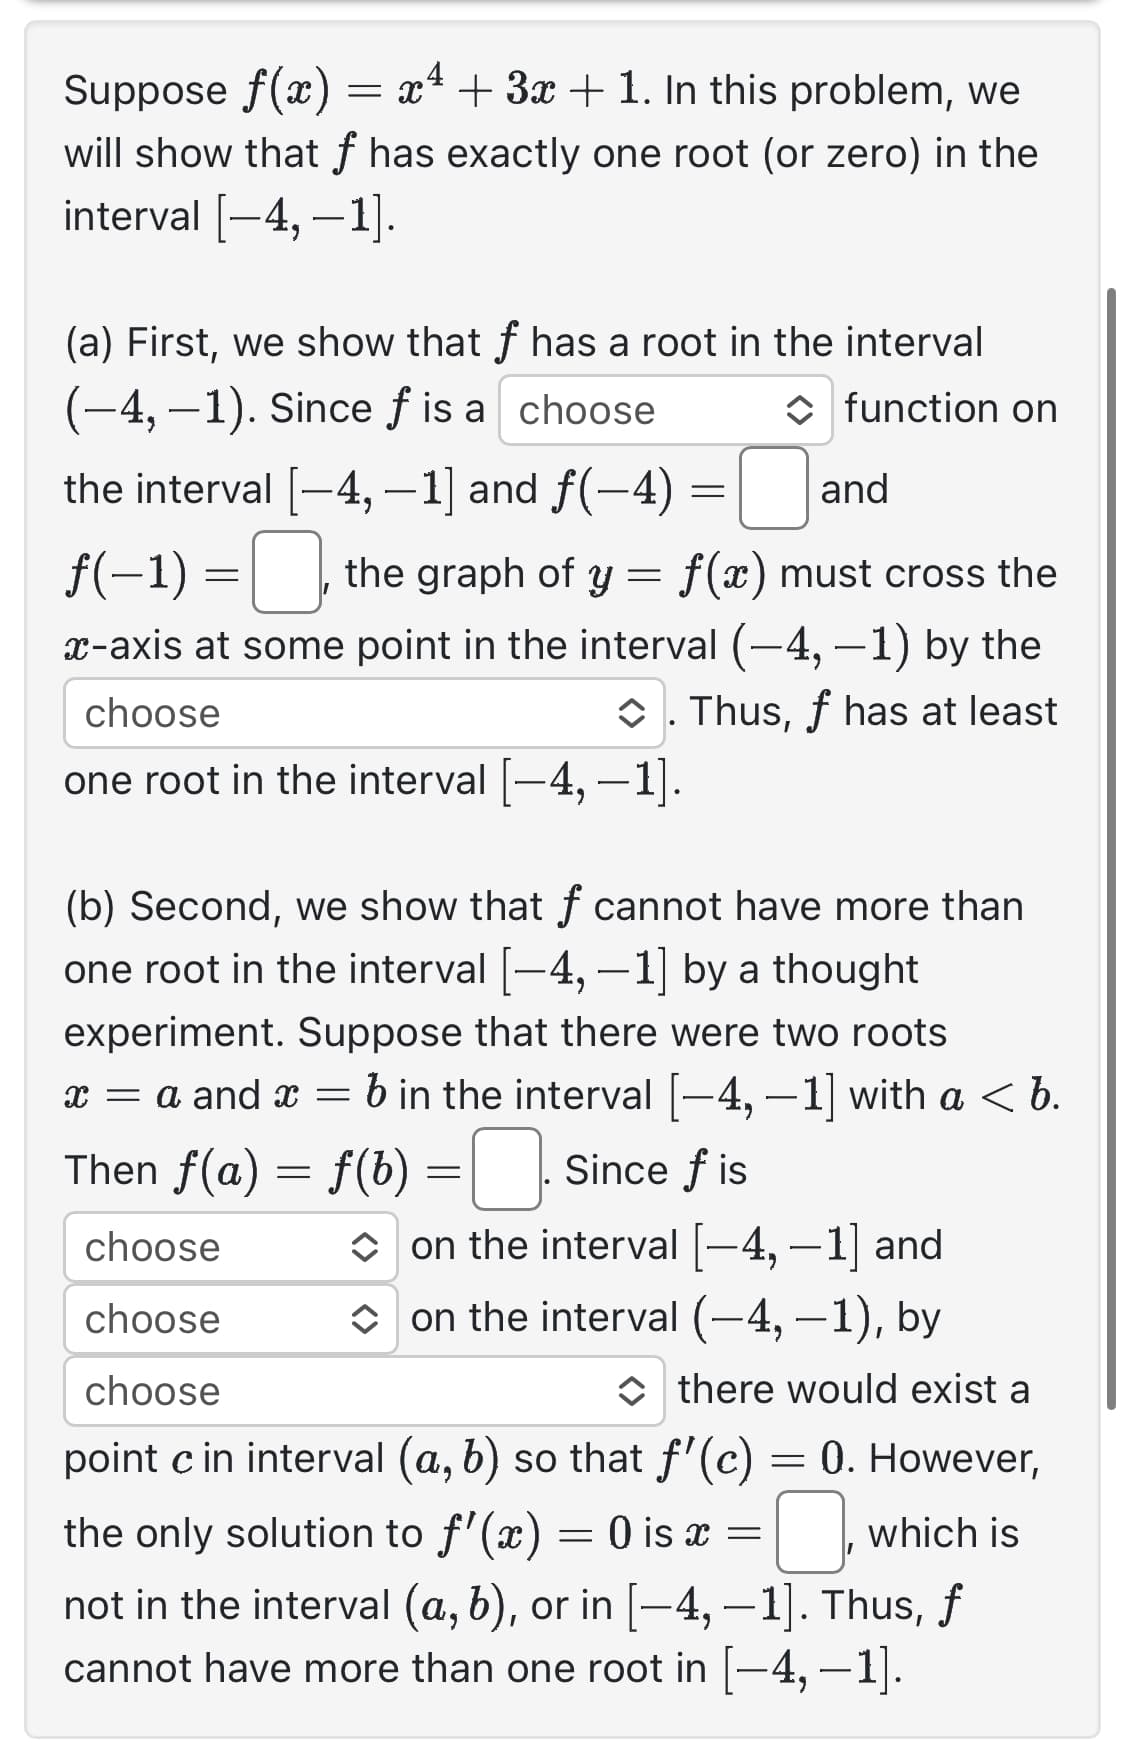 Suppose f(x) = x² + 3x + 1. In this problem, we
will show that f has exactly one root (or zero) in the
interval [-4,-1].
(a) First, we show that f has a root in the interval
(-4,-1). Since f is a choose
function on
the interval [-4, -1] and f(-4)=
and
f(-1) =, the graph of y = f(x) must cross the
x-axis at some point in the interval (-4,-1) by the
◆. Thus, f has at least
choose
one root in the interval [—4, -1].
(b) Second, we show that f cannot have more than
one root in the interval [−4, -1] by a thought
experiment. Suppose that there were two roots
x = a and x = b in the interval [-4, −1] with a < b.
Then f(a) = f(b) = Since fis
choose
on the interval [-4,-1] and
choose
on the interval (-4,-1), by
choose
there would exist a
point c in interval (a, b) so that f'(c) = 0. However,
the only solution to f'(x) = 0 is x =
not in the interval (a, b), or in [−4, -1]. Thus, f
cannot have more than one root in [−4, −1].
0
which is